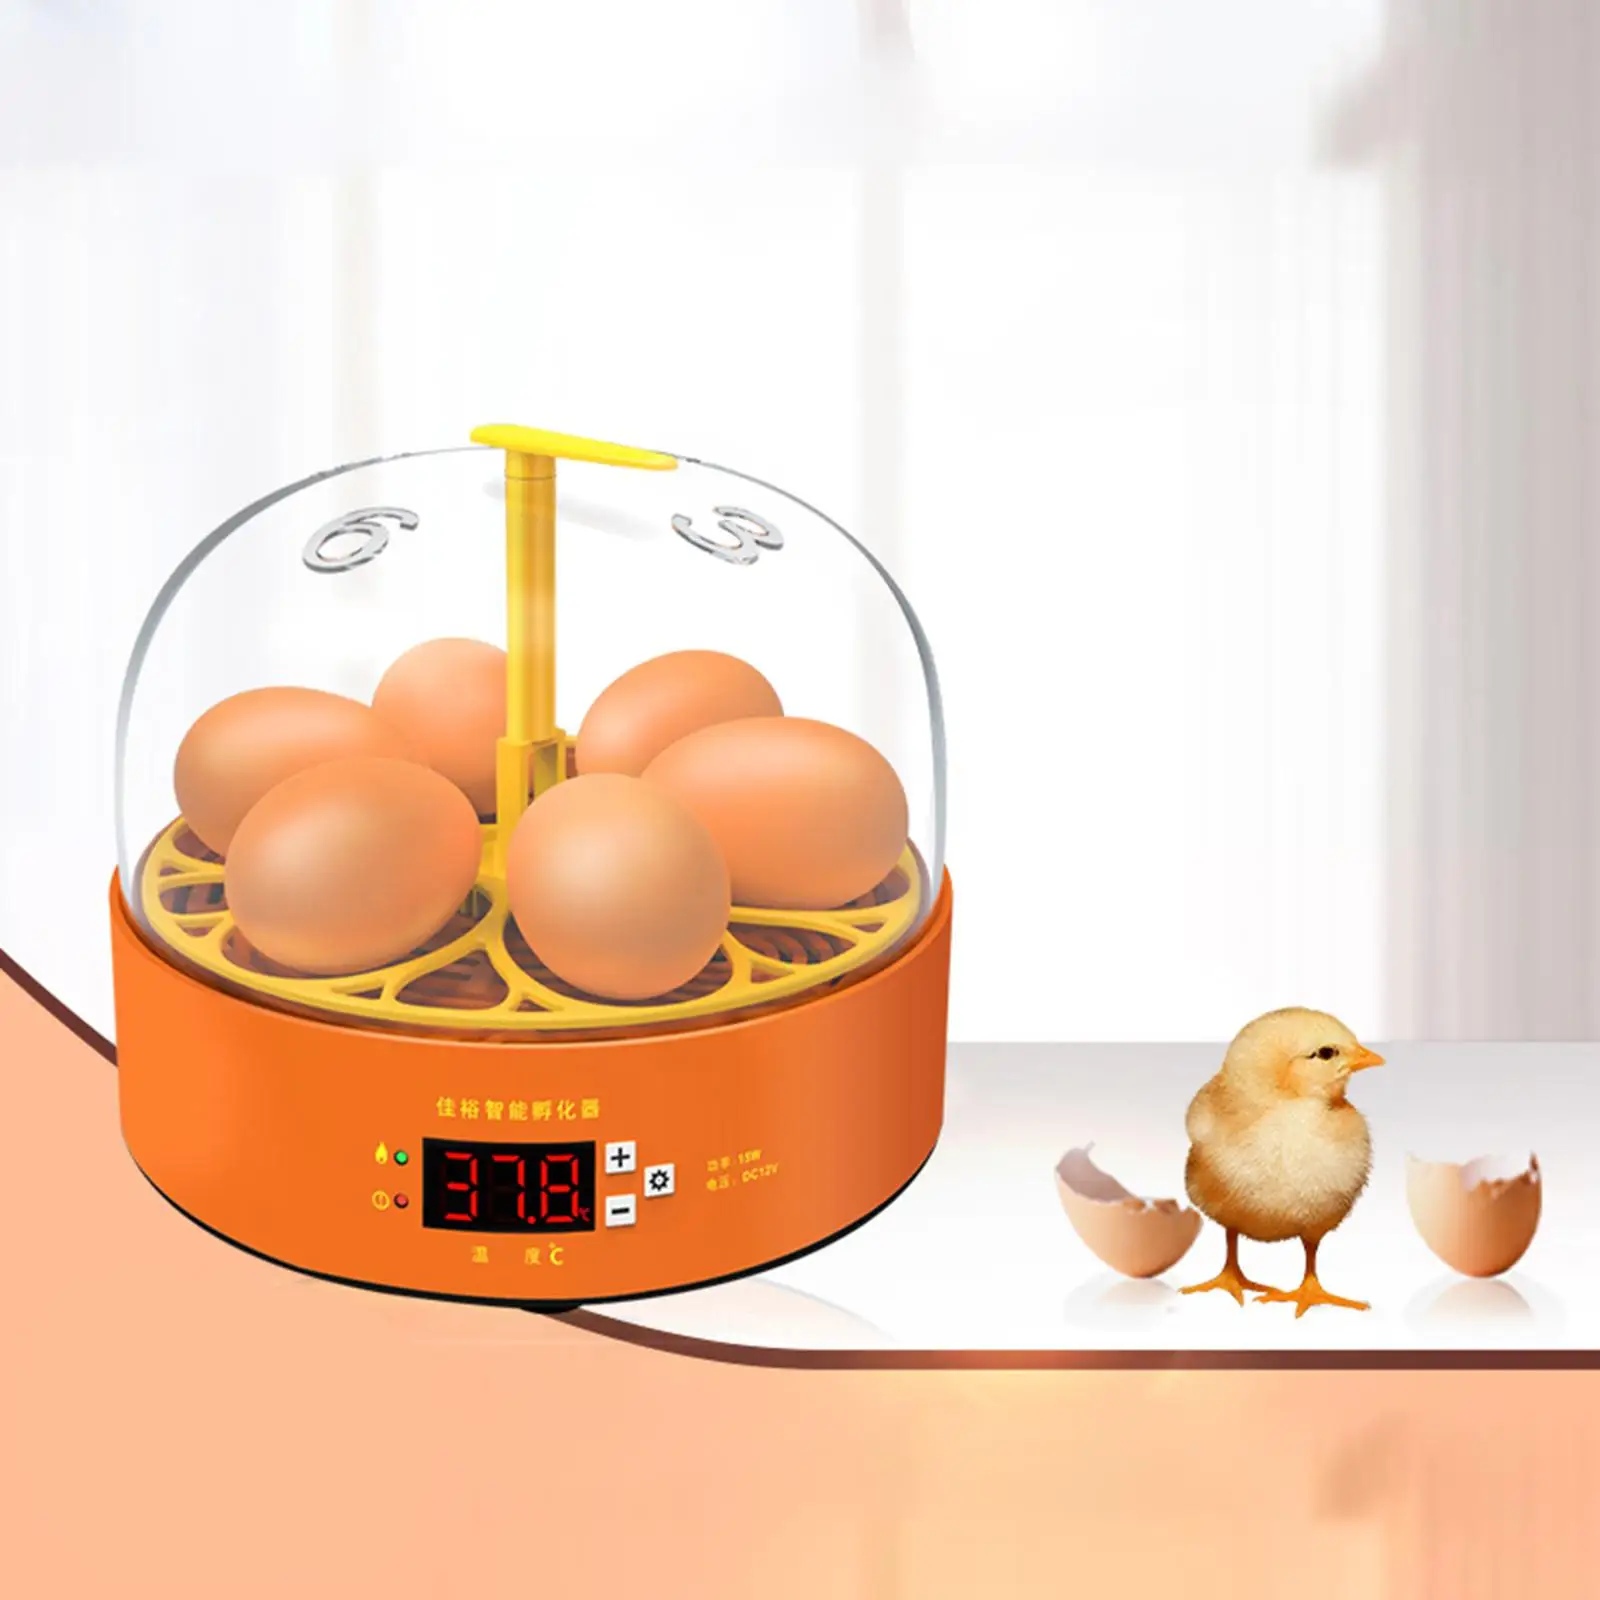 

6 Eggs Incubator Automatic Egg Turner Hatching Machine Digital Temperature Control Brooder for Poultry Hatcher Quail Birds Goose